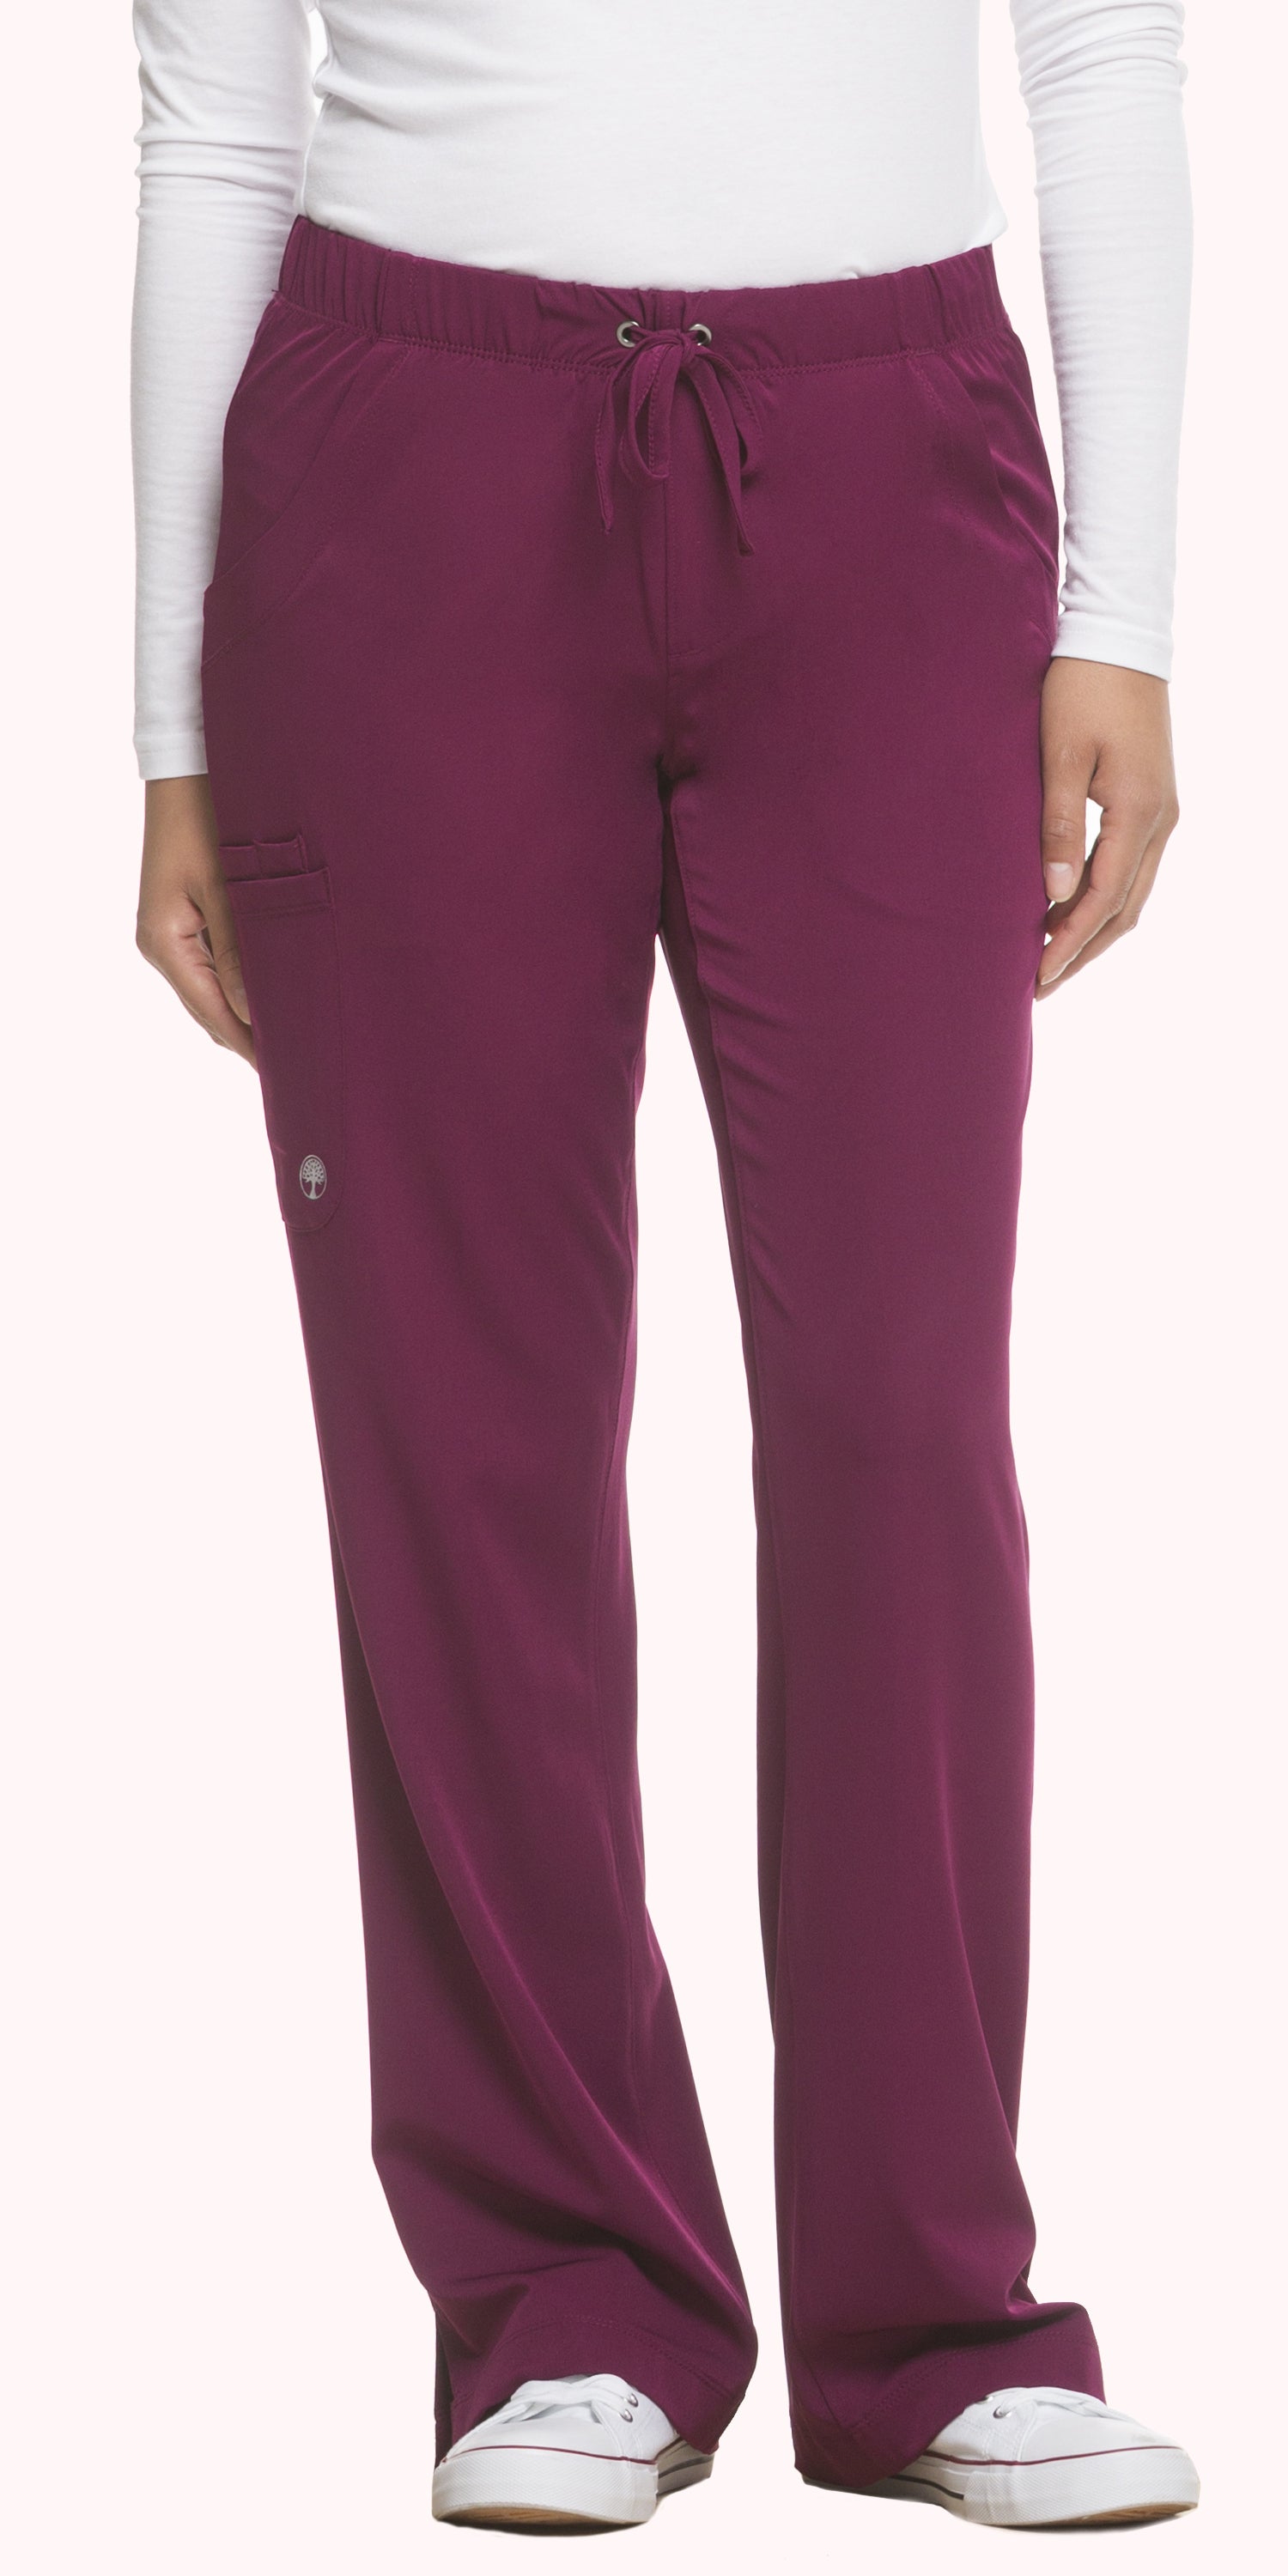 Healing Hands HHWorks 9560 Rebecca Women's Pant - TALL wine front 